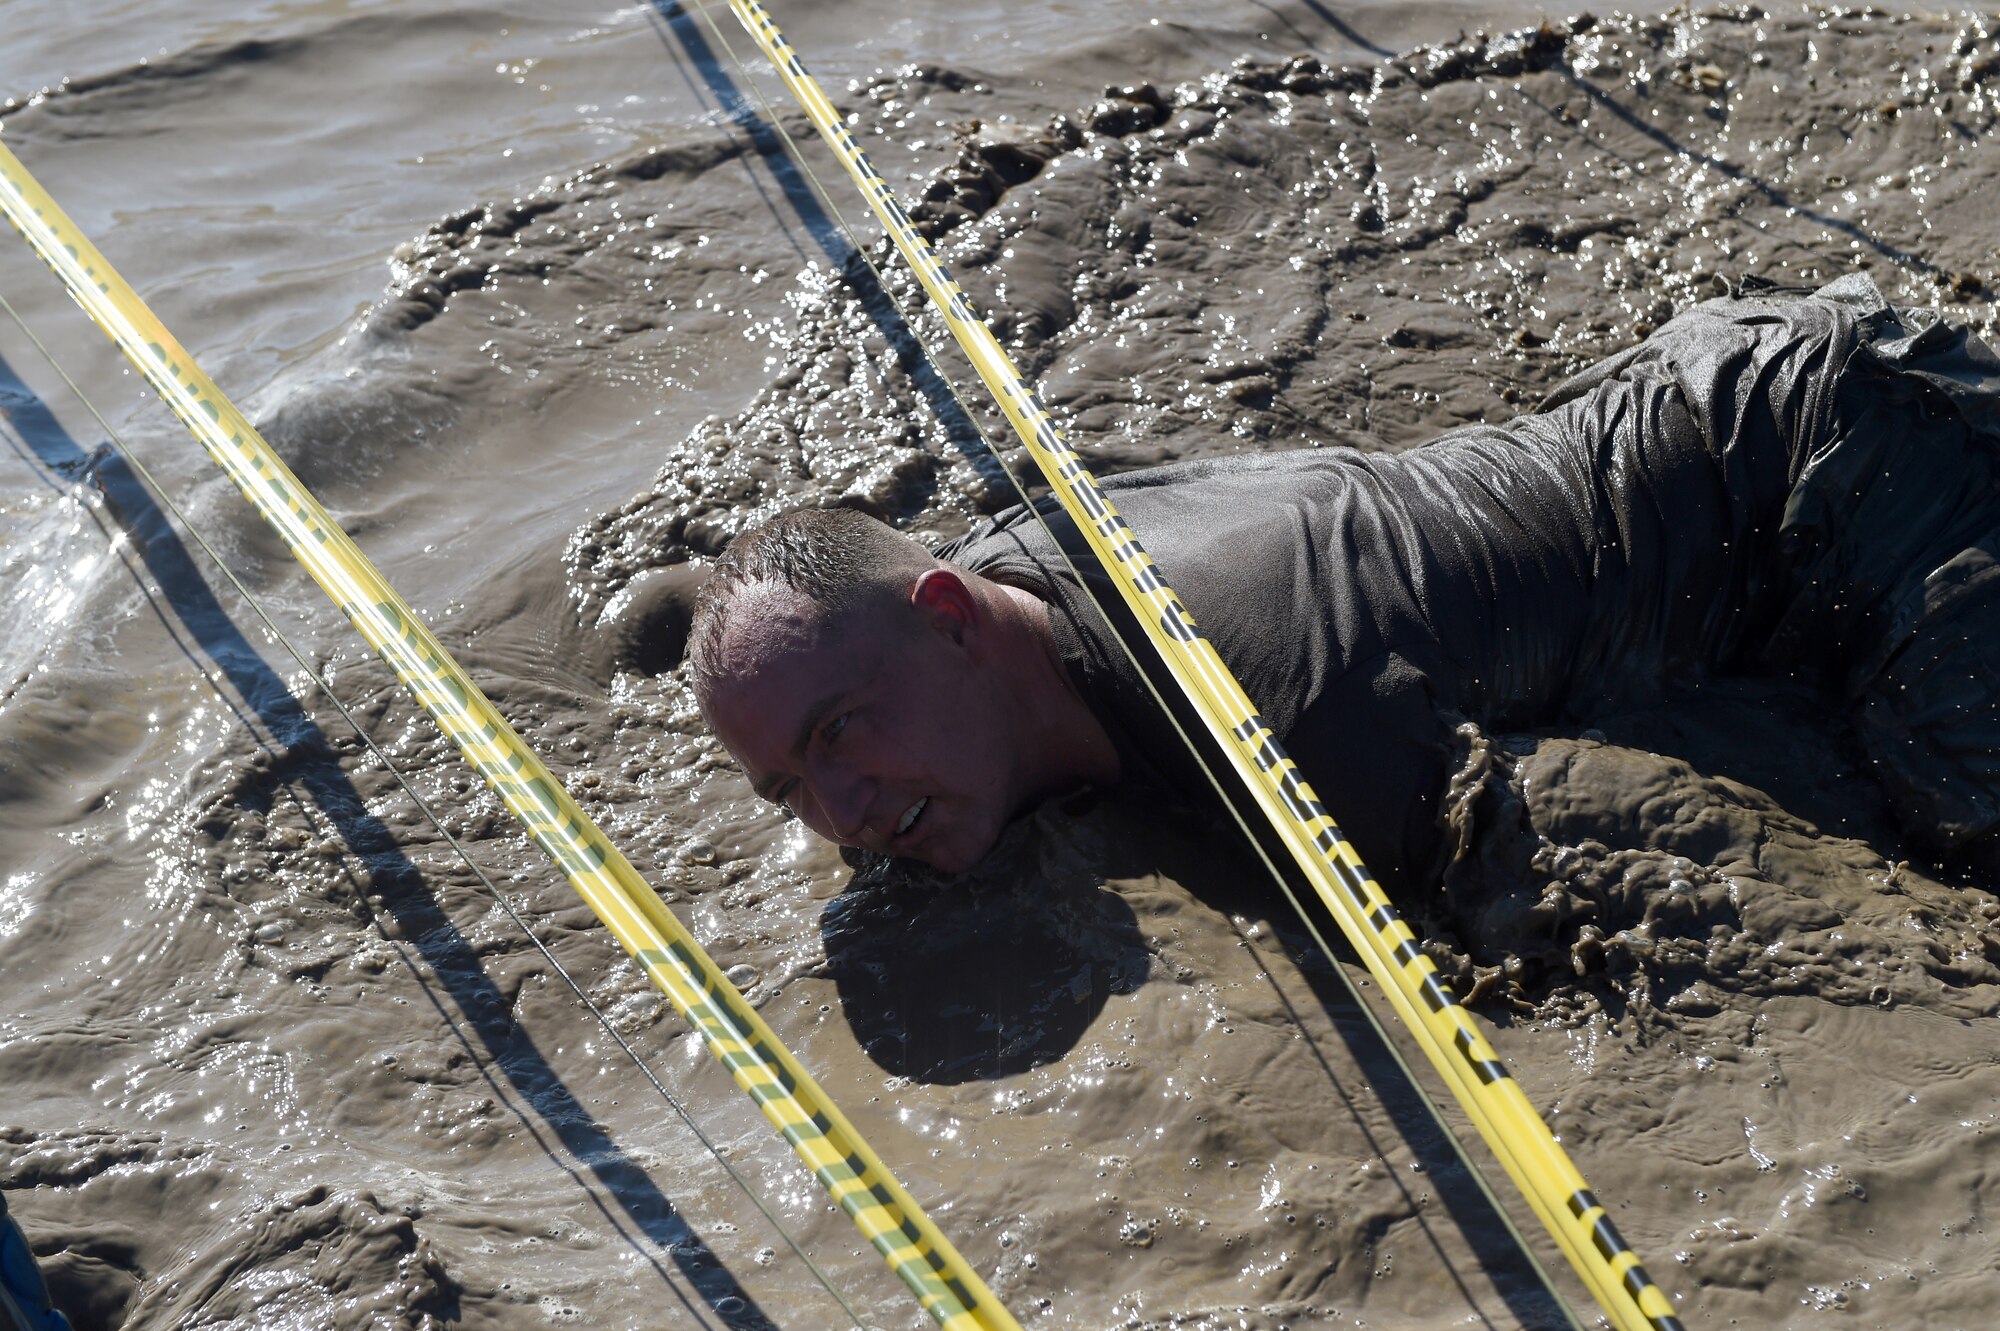 Senior Master Sgt. Shane Enos traverses the low-crawl obstacle during WARFIT Sept. 25, 2014, on Buckley Air Force Base, Colo. The 460th Civil Engineer Squadron hosted the September WARFIT, which consisted of a 5K run and a mud obstacle course. WARFIT is a way for the 460th Space Wing and base partner units to get together and stay physically fit. (U.S. Air Force photo by Airman Emily E. Amyotte/Released)